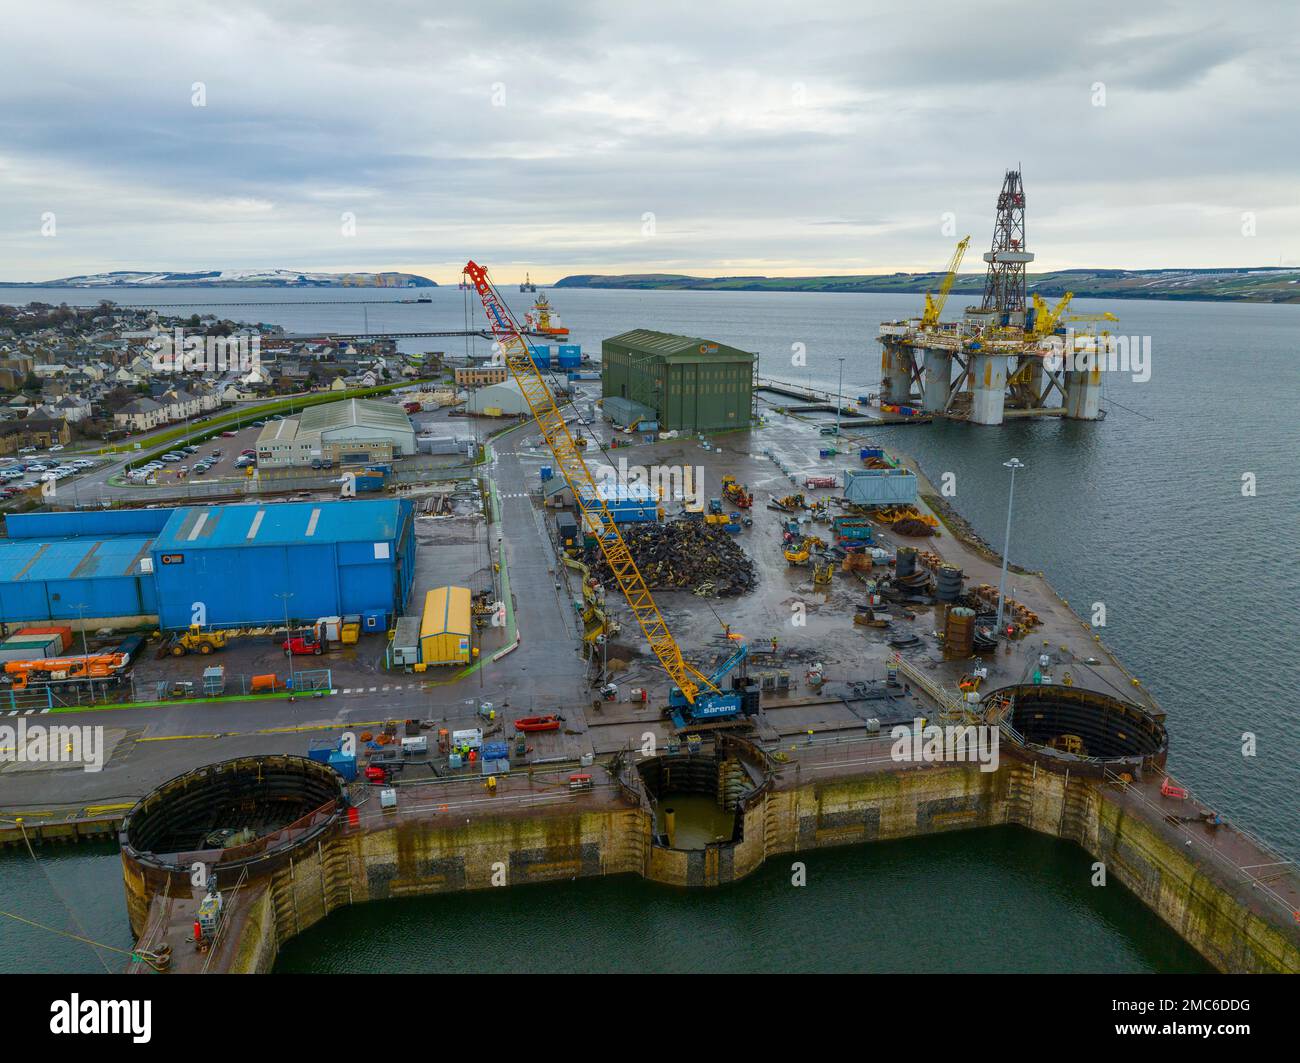 Invergordon, Scotland, UK. 21 January 2023. Aerial views of Port of Cromarty Firth at Invergordon, Ross and Cromarty. The Inverness and Cromarty Firth Freeport bid has been awarded Freeport status by the Scottish and UK Governments. Also known as Green Freeports or Greenports these new ports are hoped to create thousands of new jobs . Iain Masterton/Alamy Live News Stock Photo